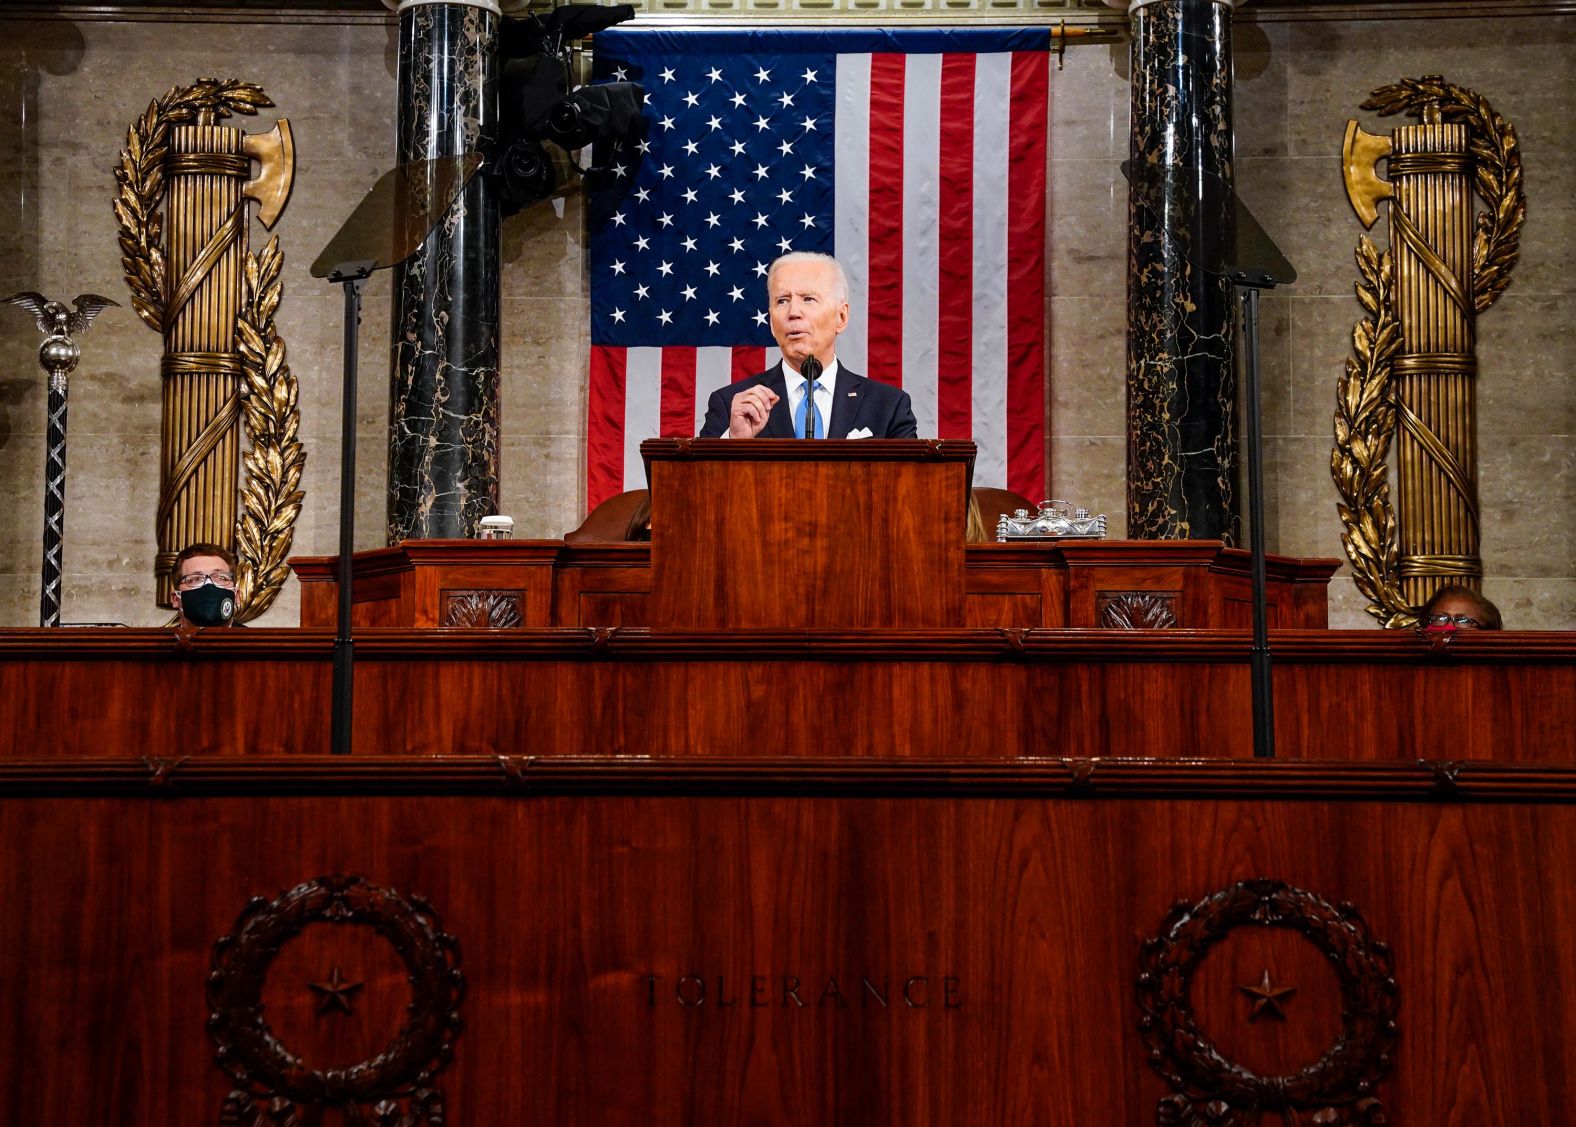 Biden used his speech <a href="index.php?page=&url=https%3A%2F%2Fwww.cnn.com%2Fpolitics%2Flive-news%2Fbiden-address-fact-check-updates-04-28-21%2Fh_d49405b6b05abd974a19b692efa4b1fa" target="_blank">to lay out an an ambitious progressive agenda,</a> proposing up to $6 trillion in new spending for infrastructure, investment in America and more social safety net programs.